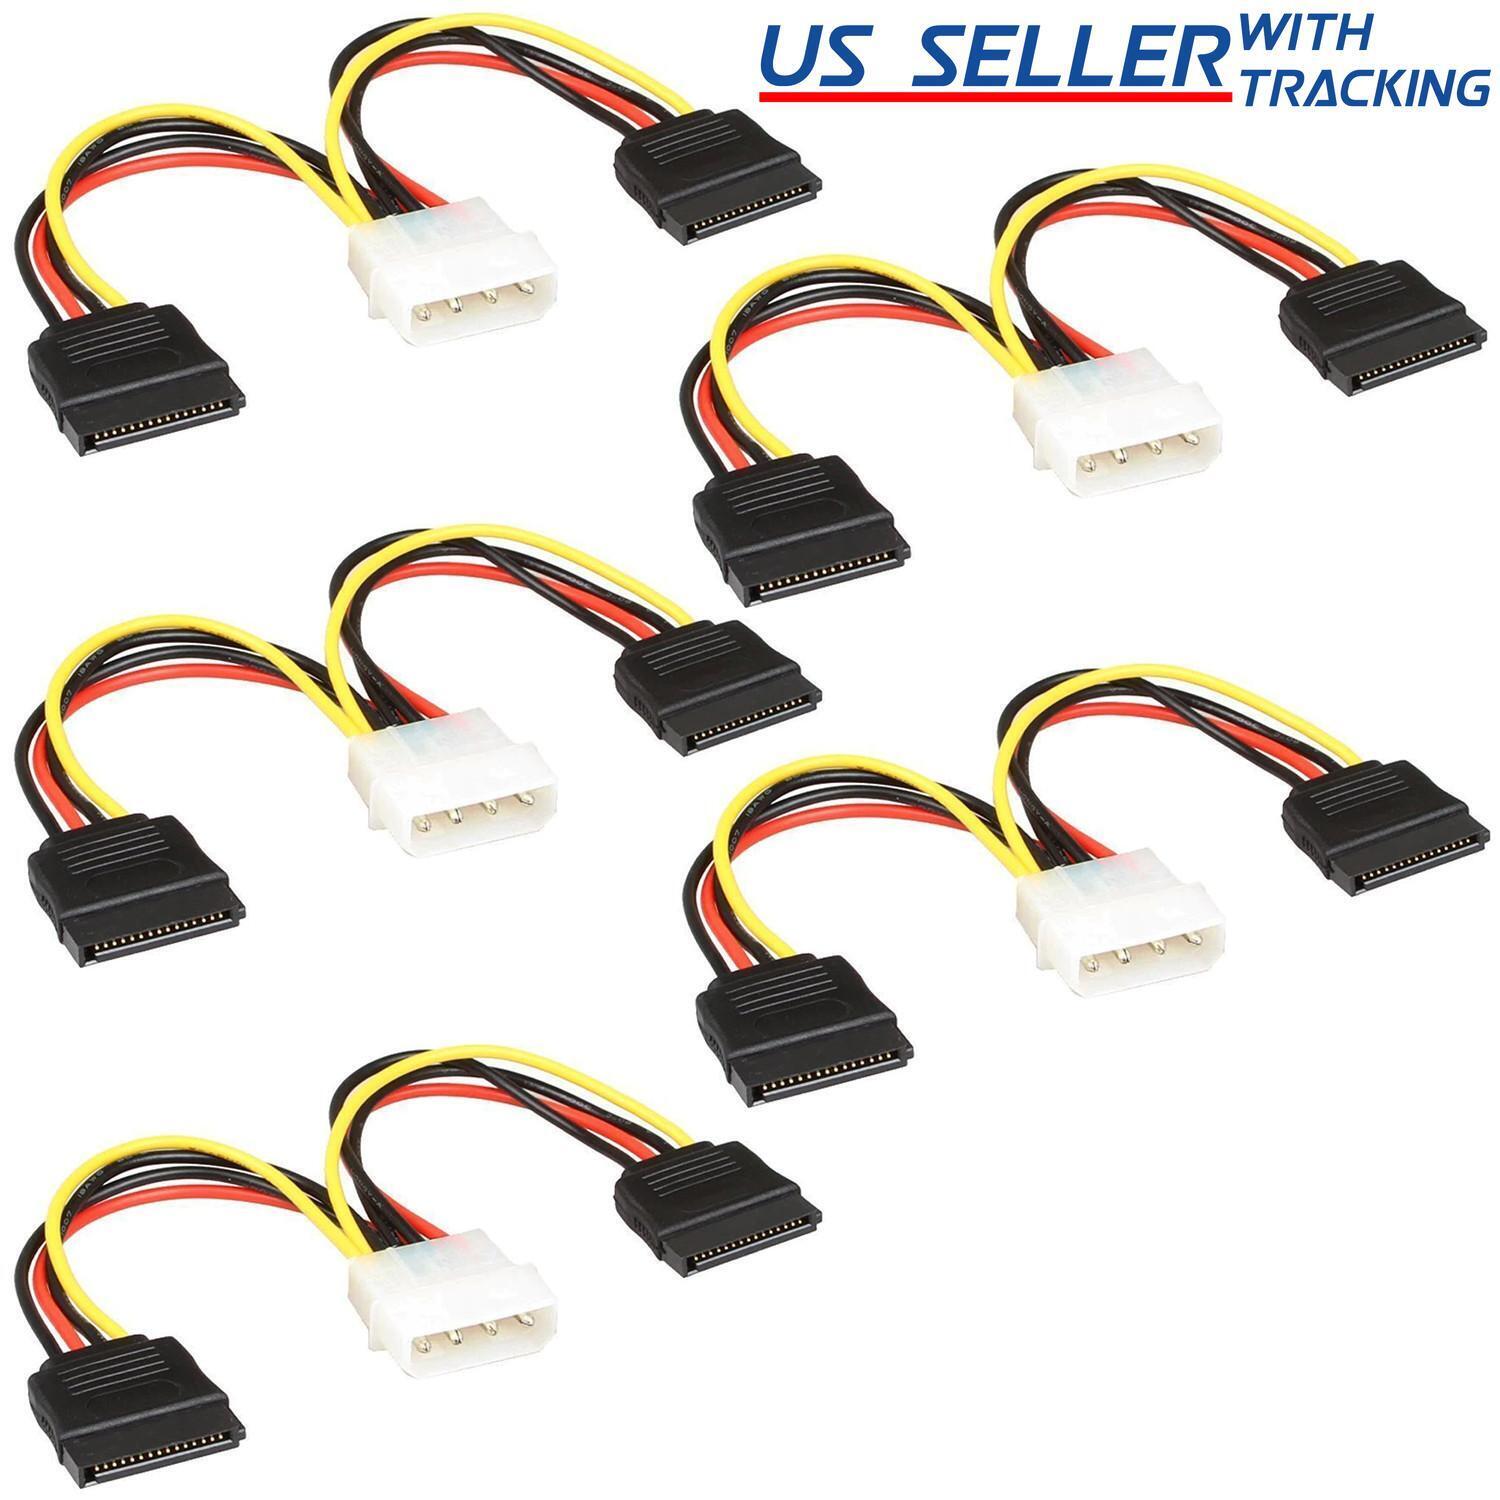 (5-pack) IDE/Molex/IP4/4-pin to 2x SATA Power 15-pin Converter Adapter Cable